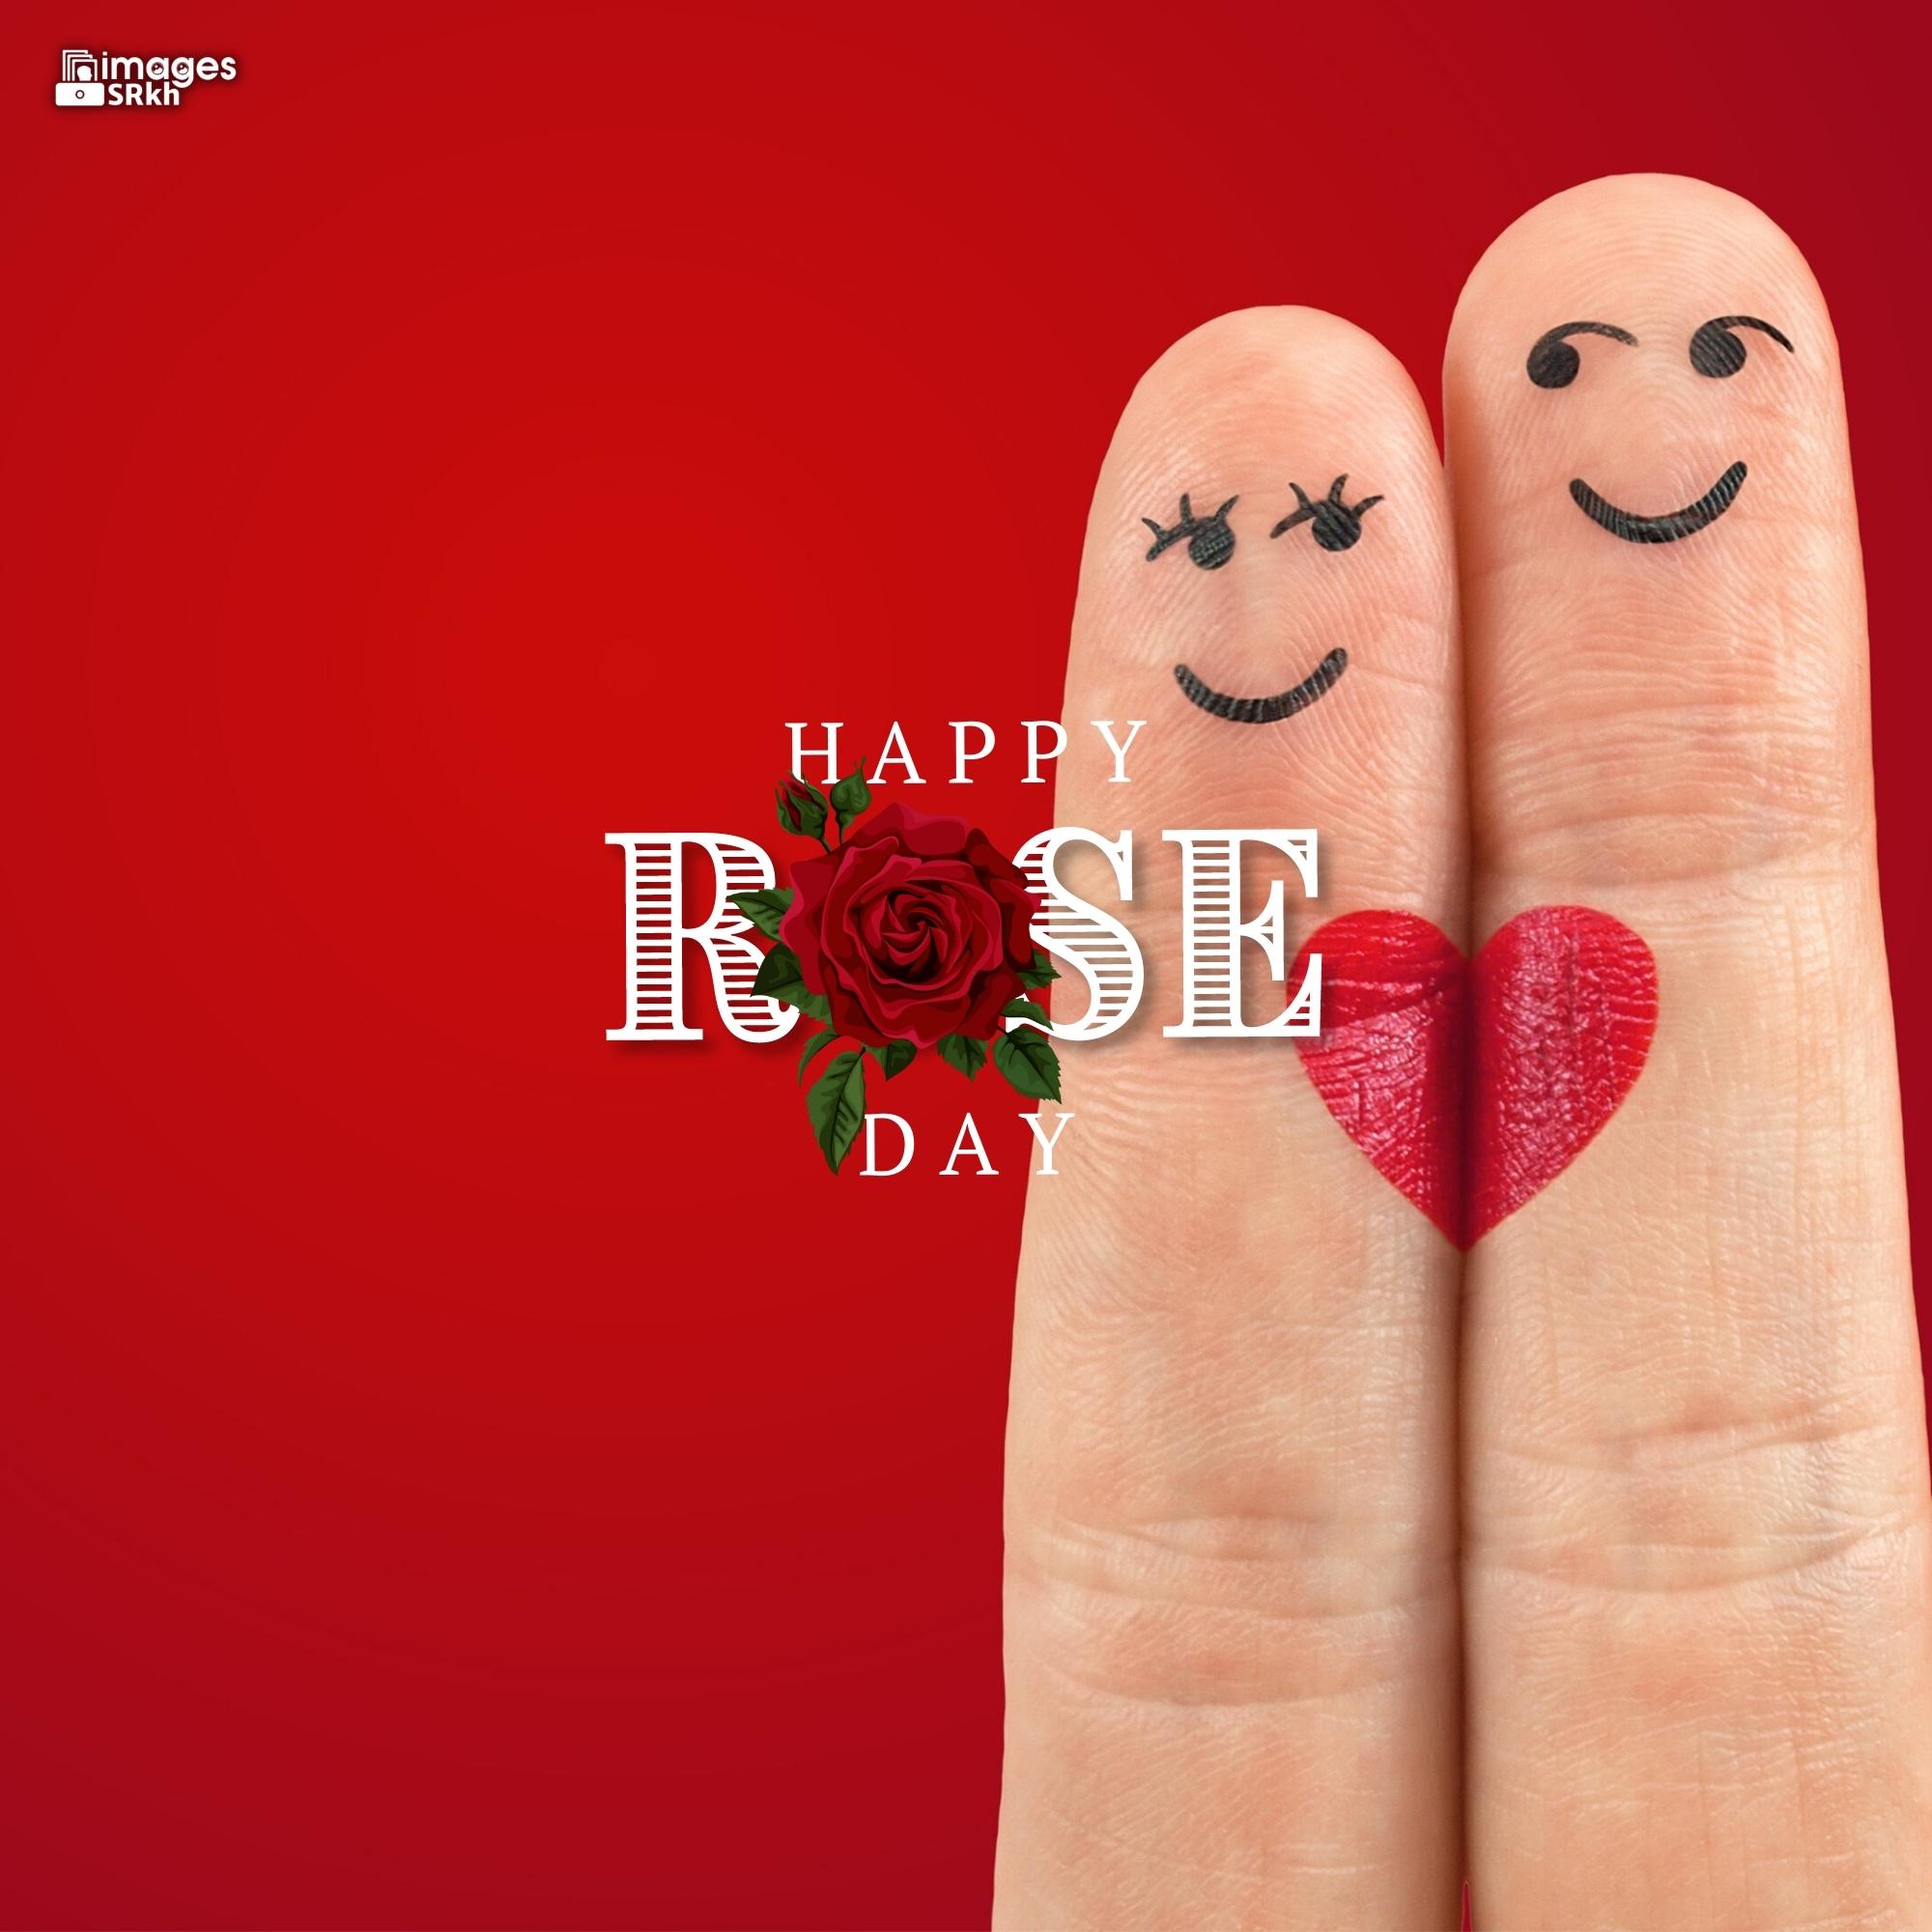 Romantic Rose Day Images Hd Download (10)